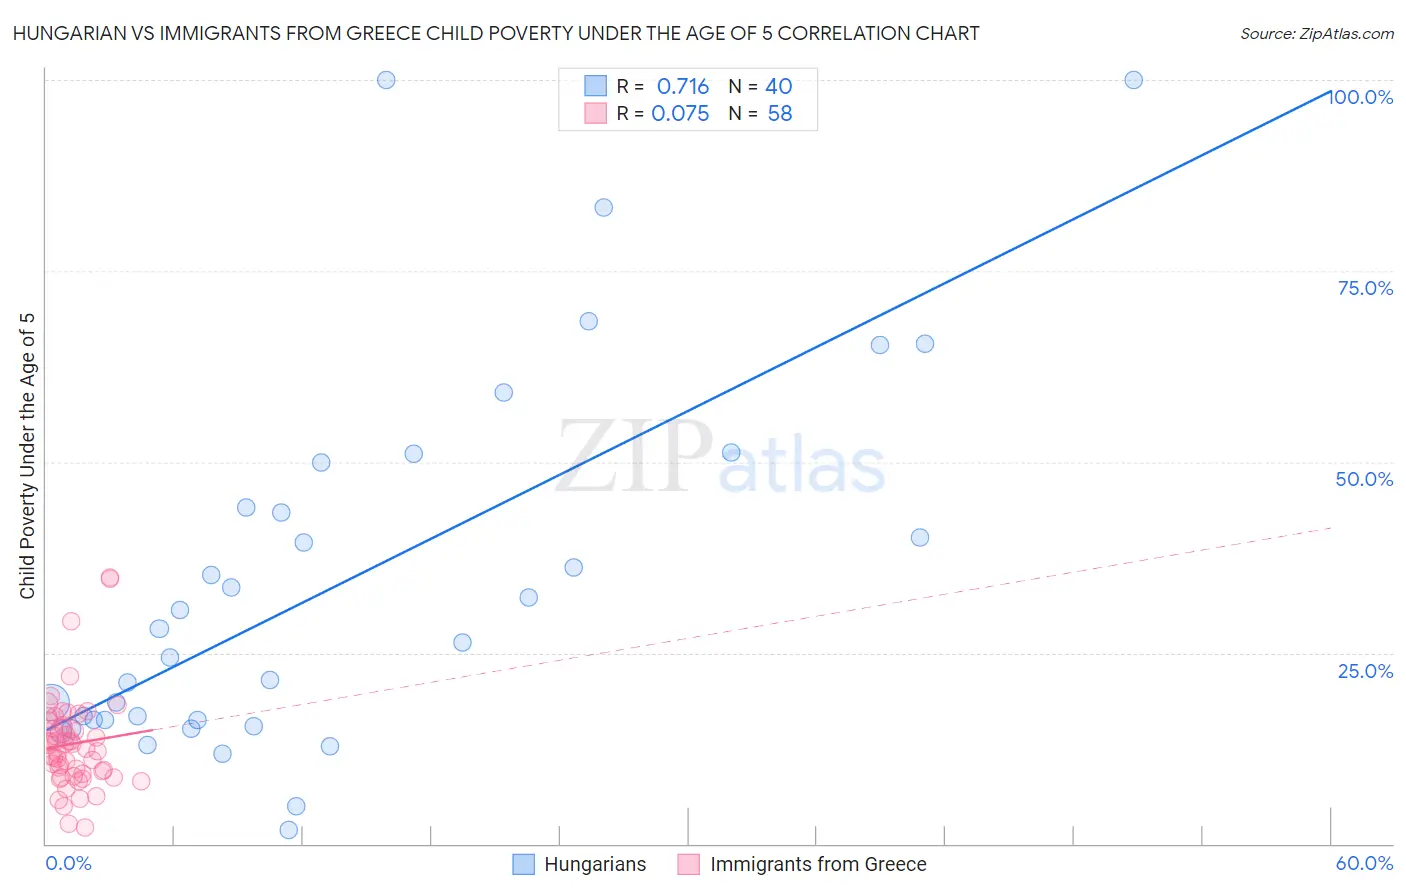 Hungarian vs Immigrants from Greece Child Poverty Under the Age of 5